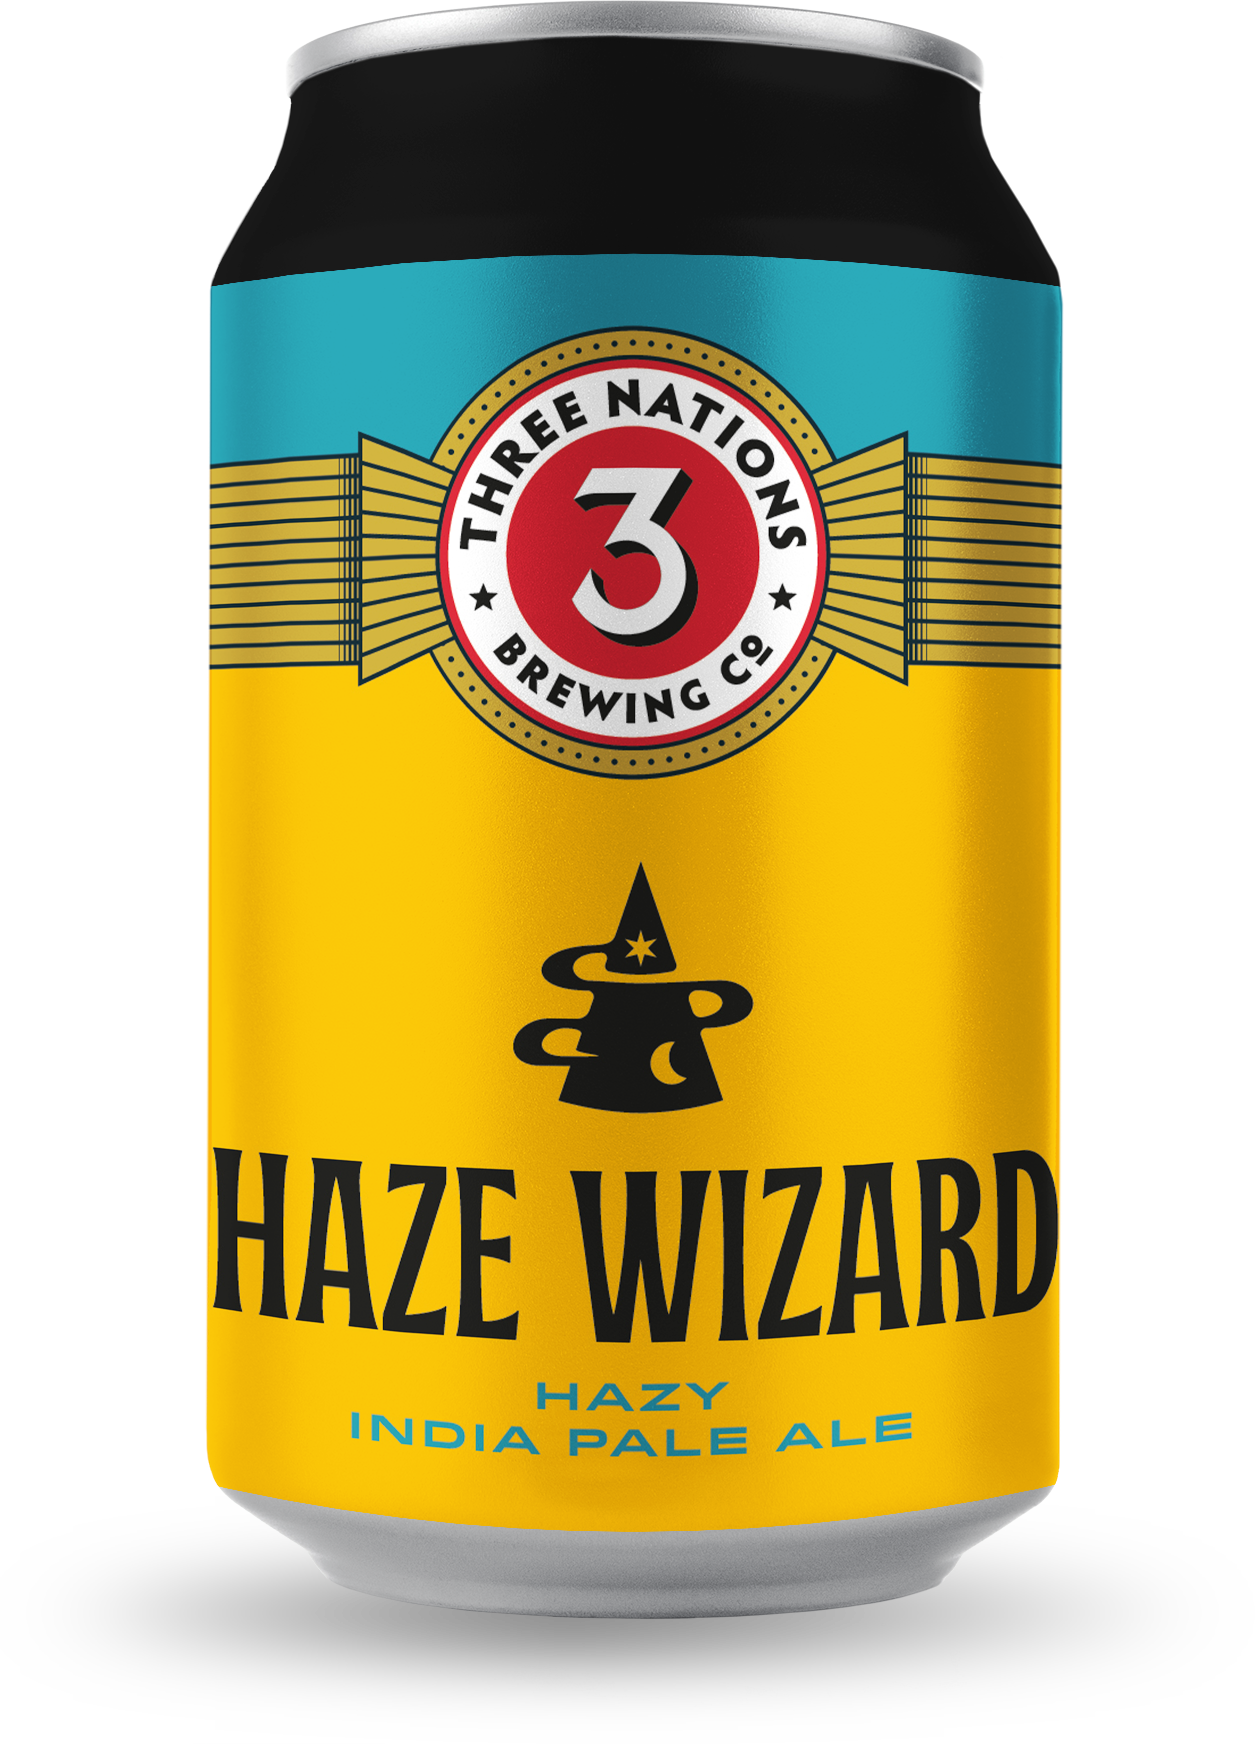 3 Nations Brewing's Haze Wizard can design